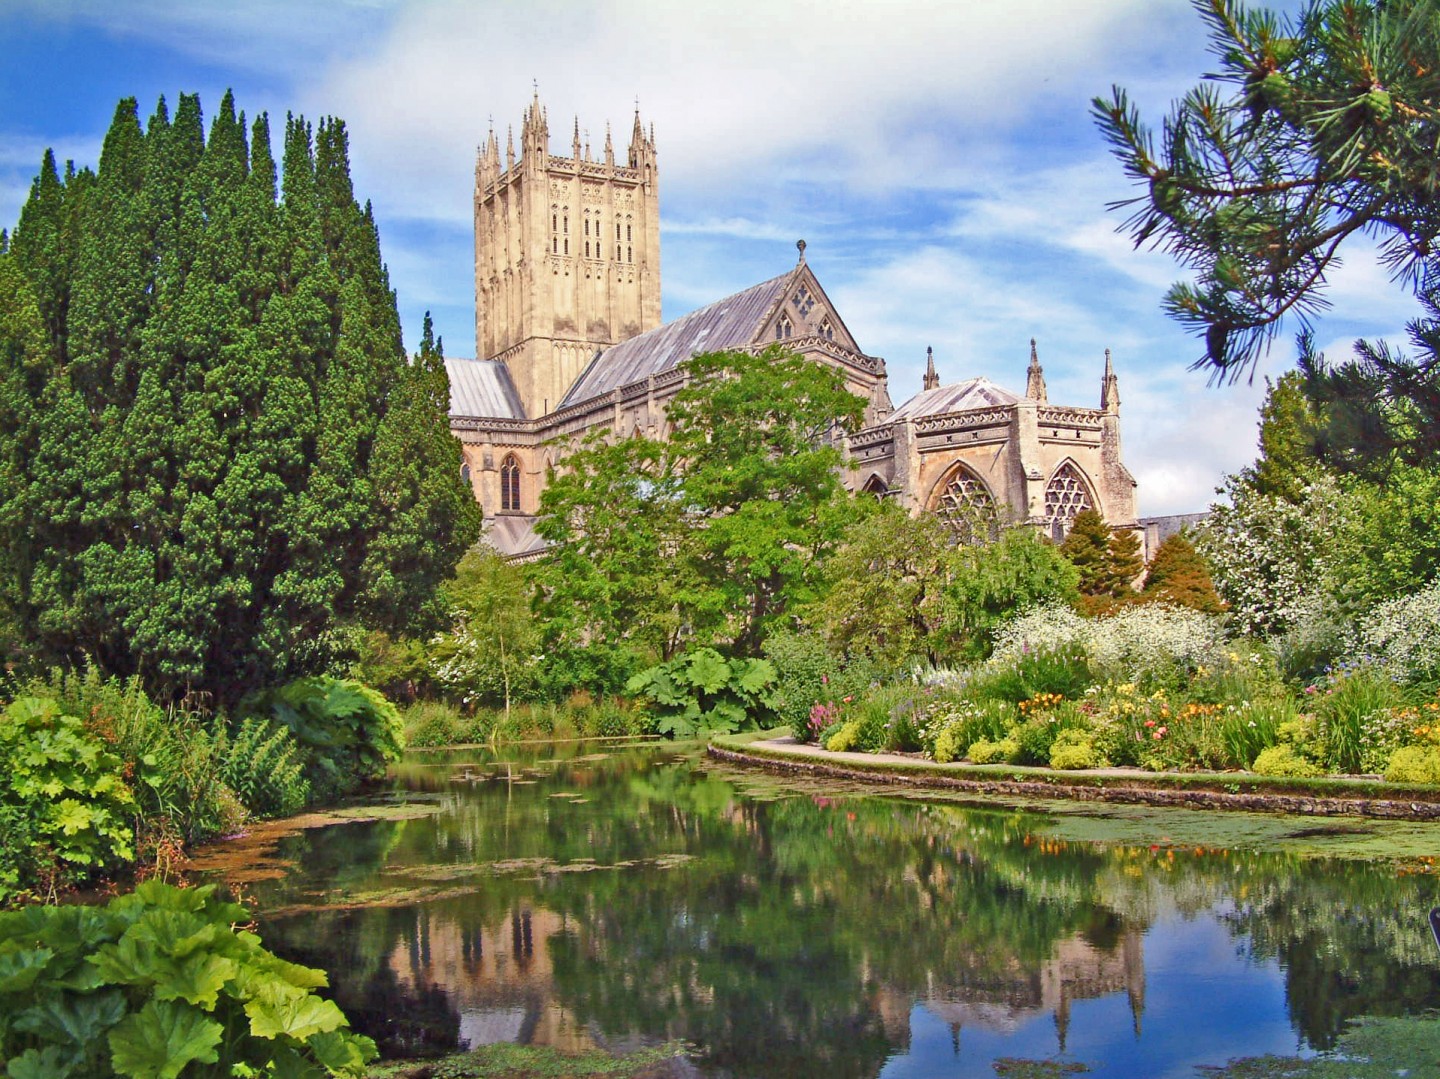 Bishop's Palace, Wells, Somerset - Great Cathedral Reflection (NCN)